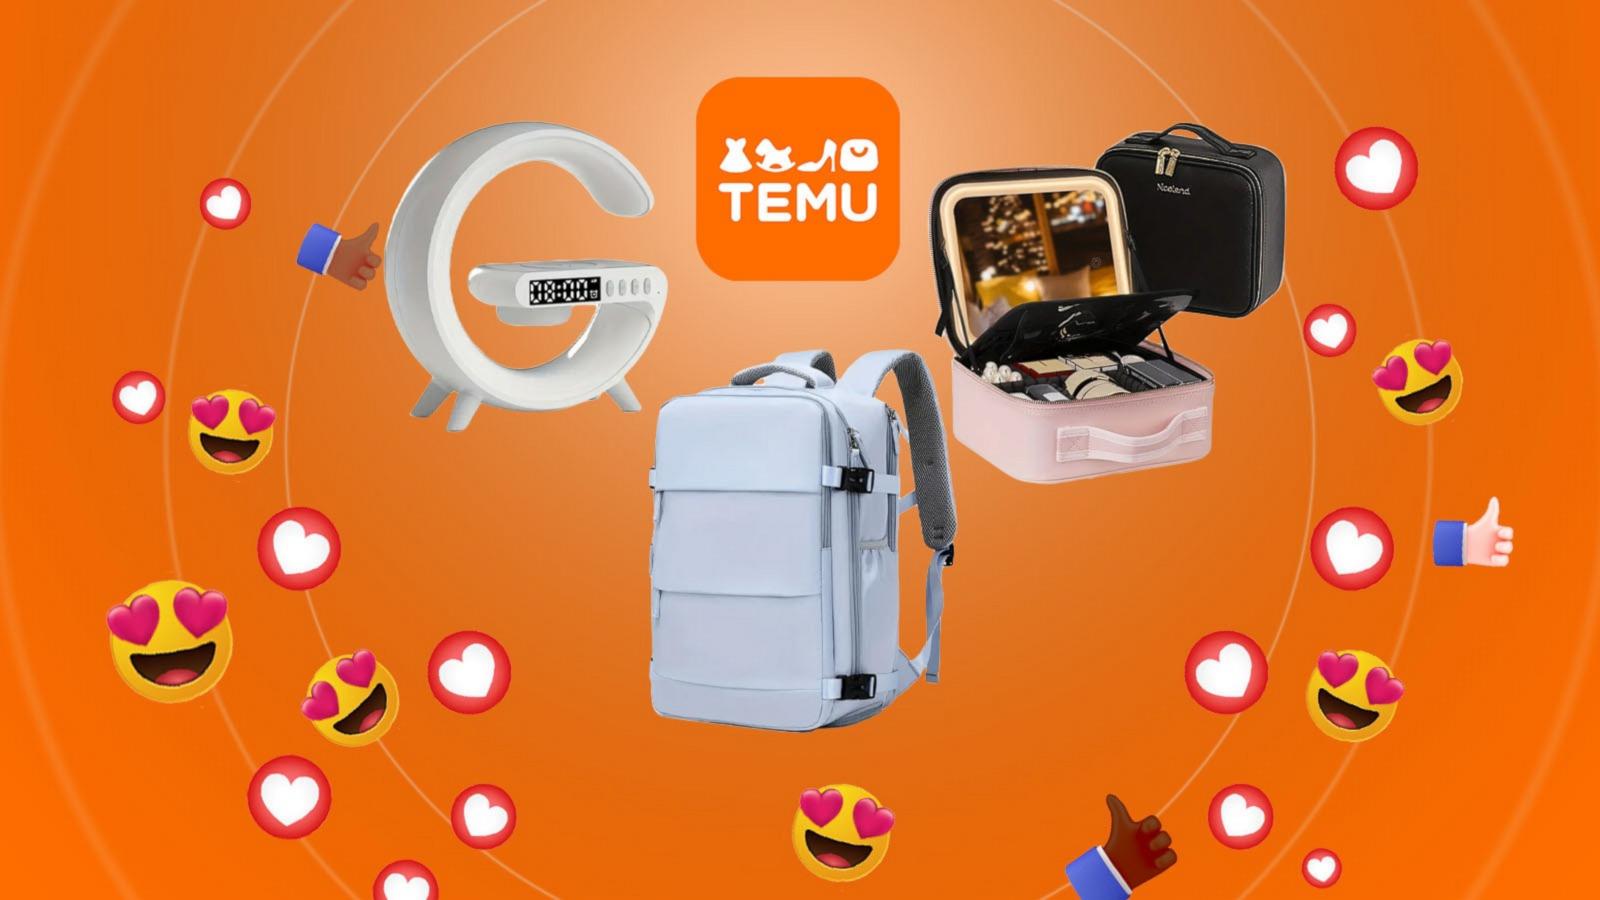 GMA' Trending Now: Cyber Monday products under $20 from TEMU, including  speakers, backpacks, toys and more - Good Morning America